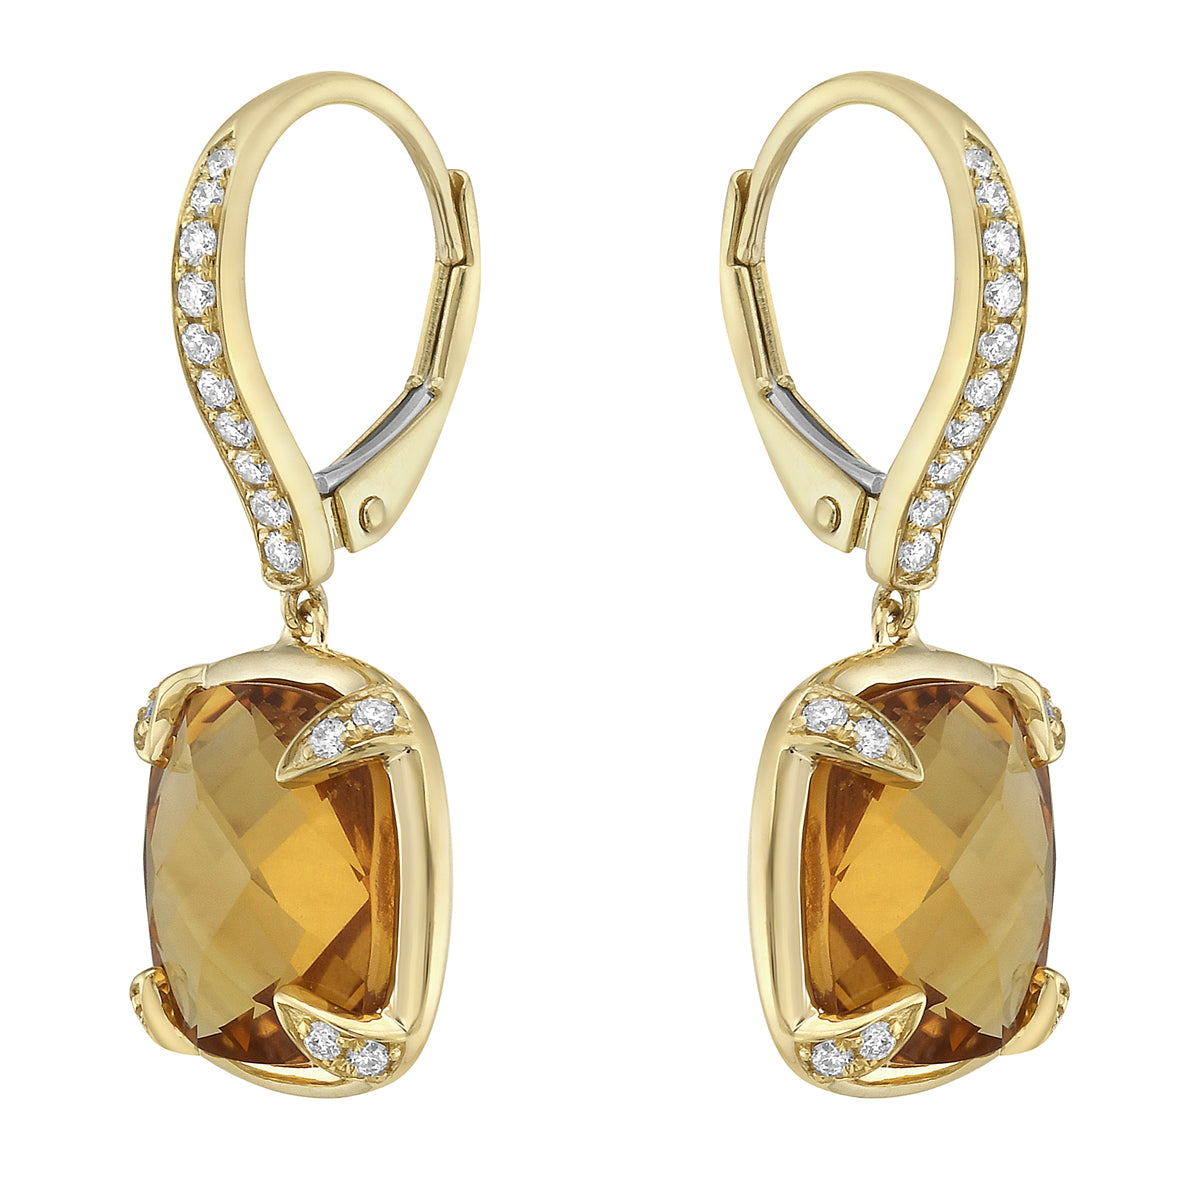 Earrings 14KY/3.1G 2CIT-7.18CT 36RD-0.22CT Citrin